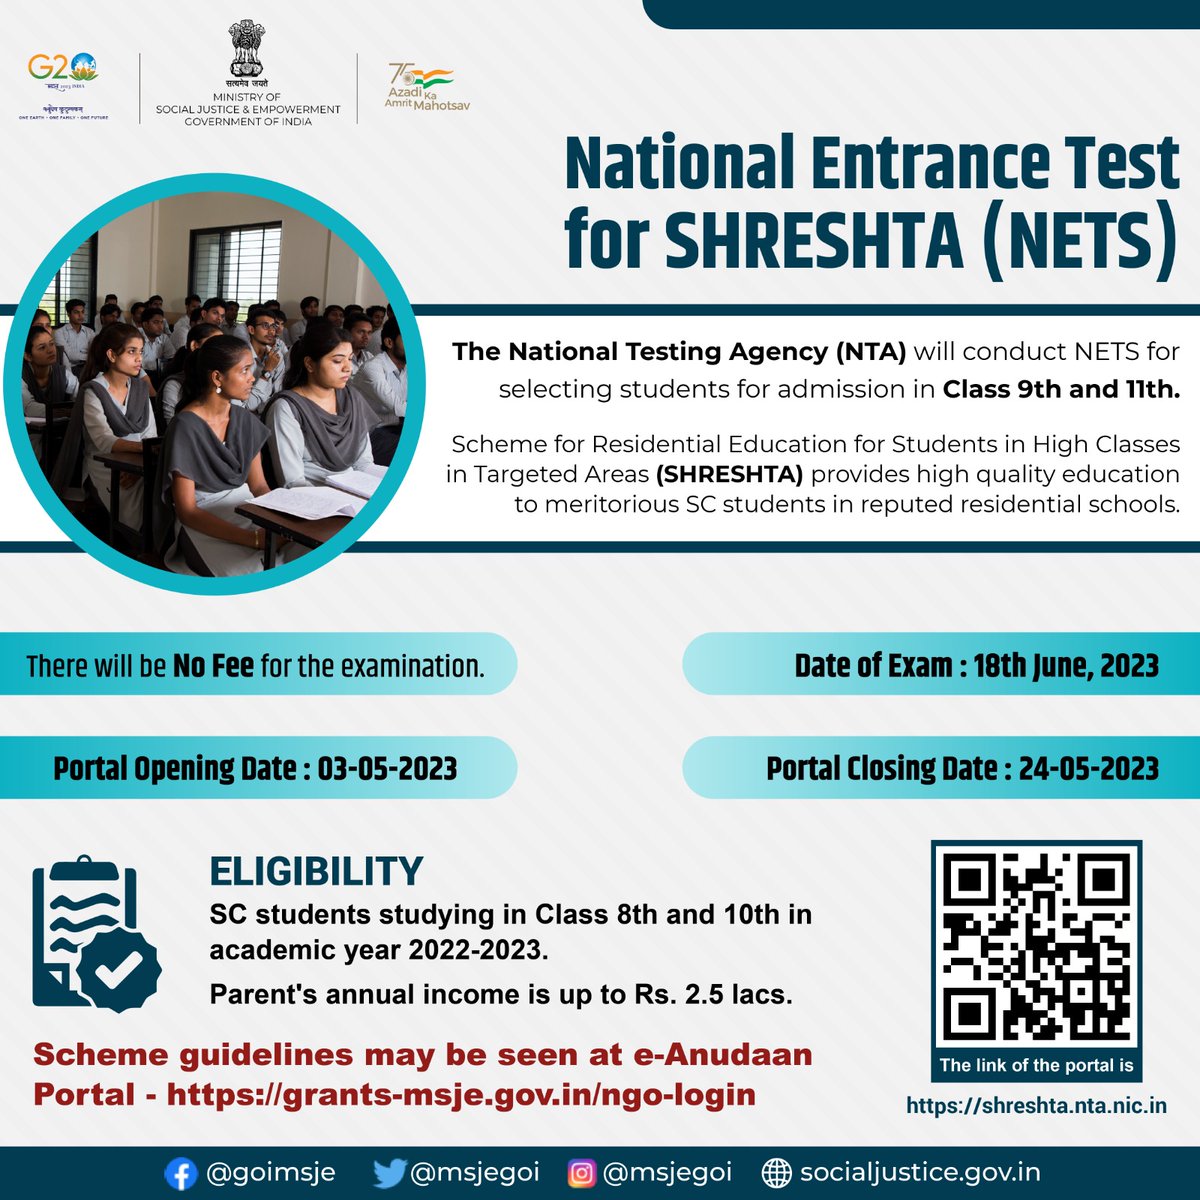 The National Testing Agency (NTA) will conduct #NETS for selecting students for admission in class 9th and 11th. #PMOIndia #SabkaSaathSabkaVikas #MakeInclusiveReal #8YearsOfSeva #MyGov #Atmanirbharbharat
@PMOIndia

@PMOIndia @narendramodi @AmitShah @Drvirendrakum13